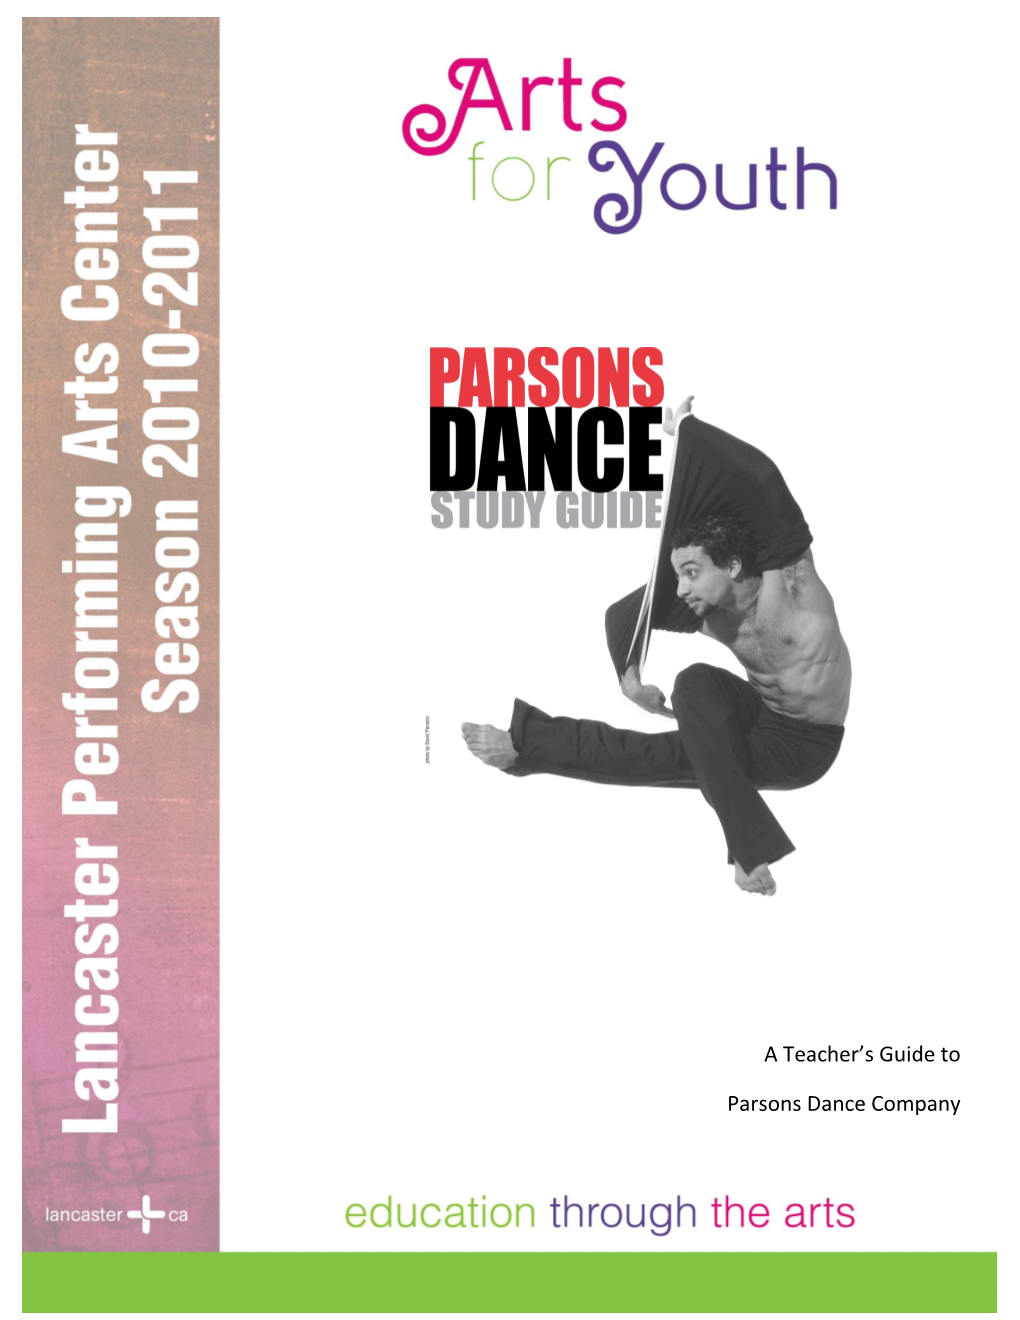 A Teacher's Guide to Parsons Dance Company